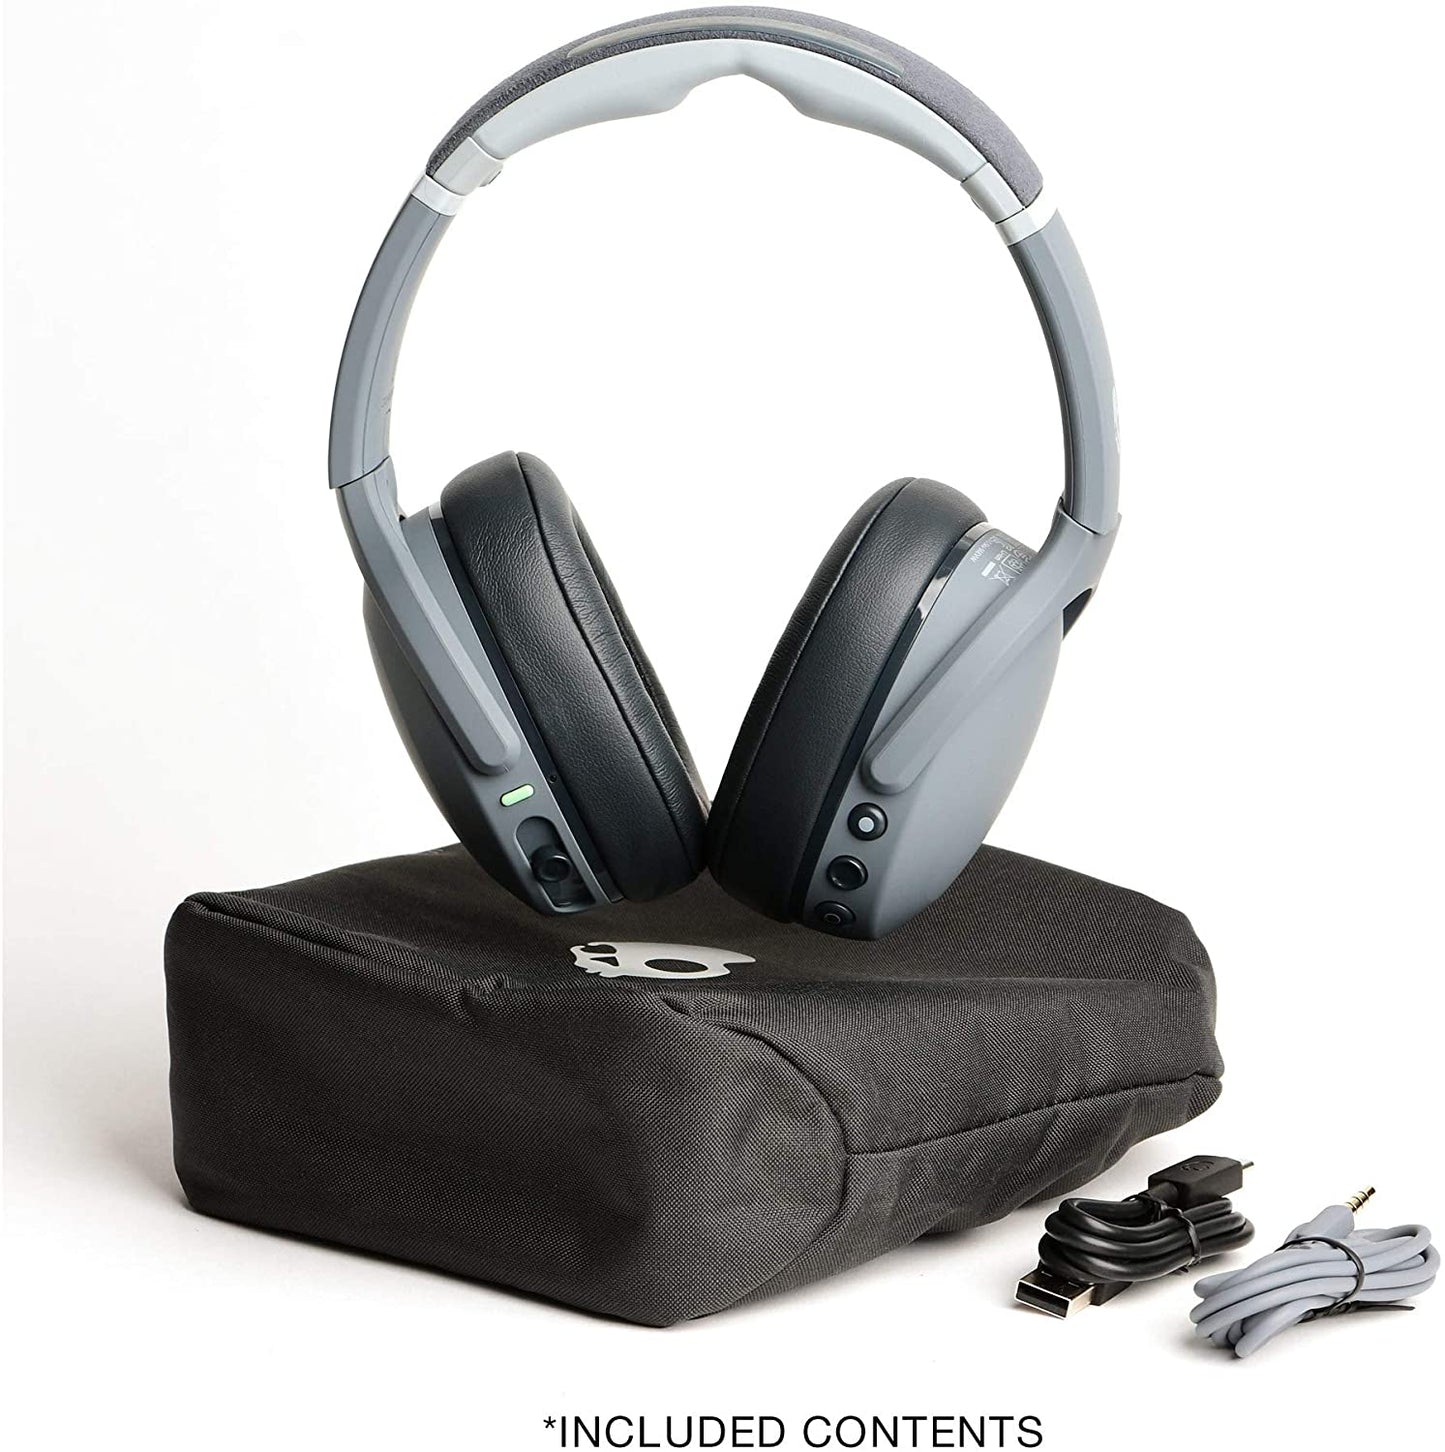 Skullcandy Crusher Evo Wireless Over-Ear Headphones Bluetooth 5.0 Headset with Adjustable Bass, 40-Hour Playtime, Personal Sound (4 Colors Available)